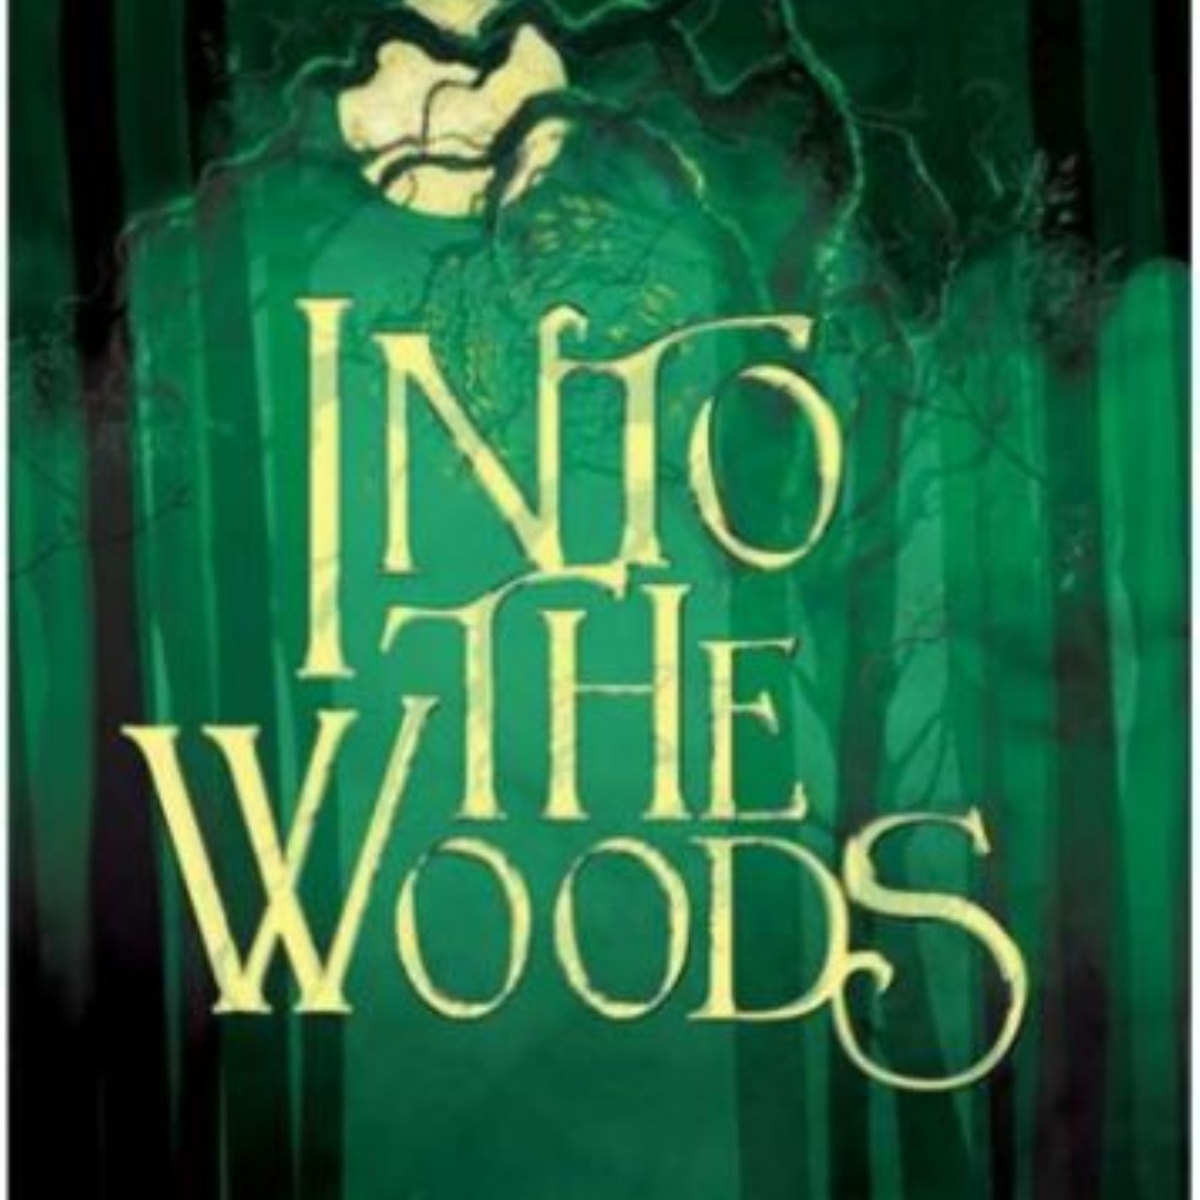 presentation high school into the woods